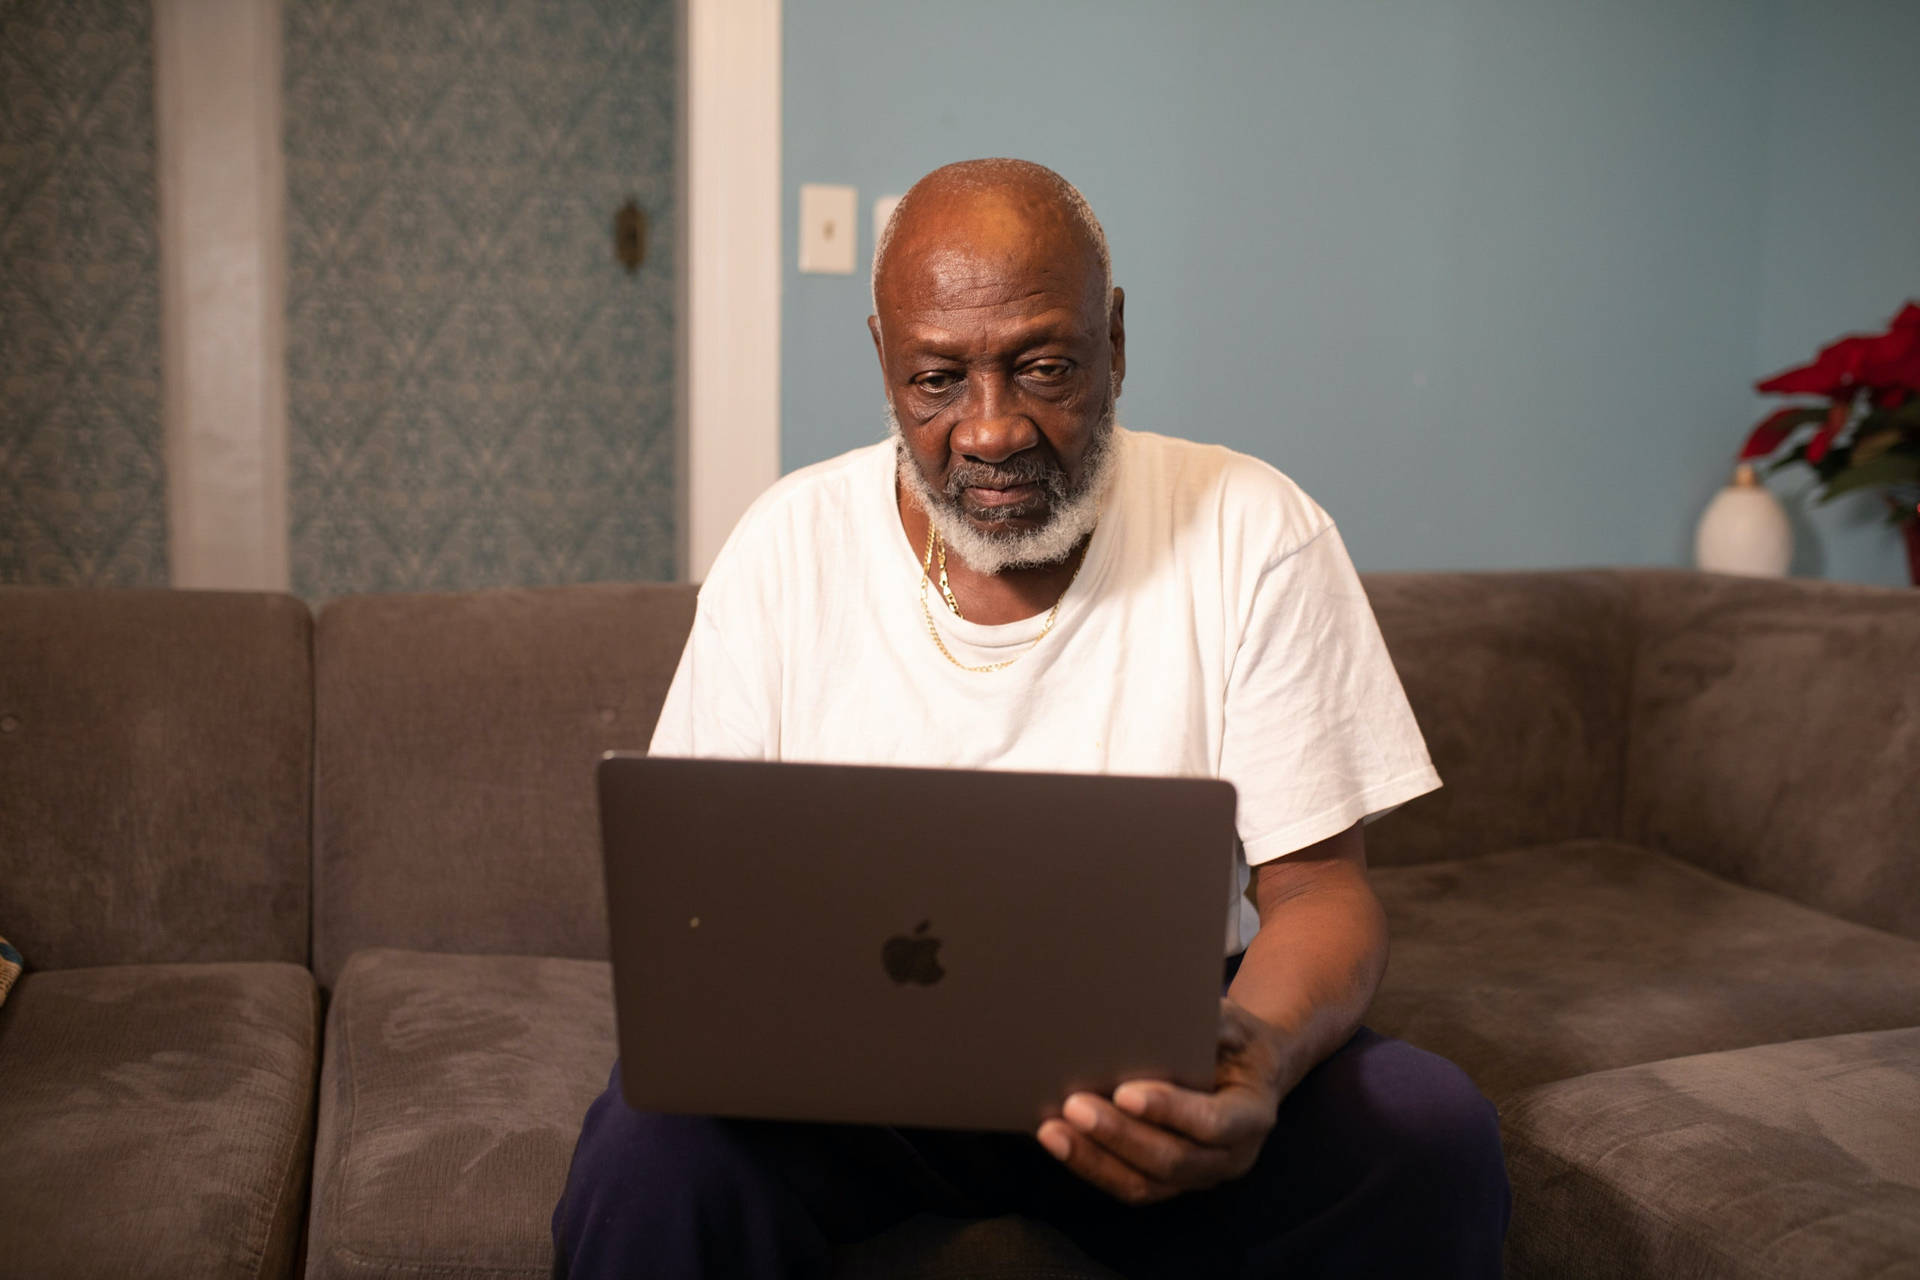 Old Black Man Using Laptop On Couch Picture